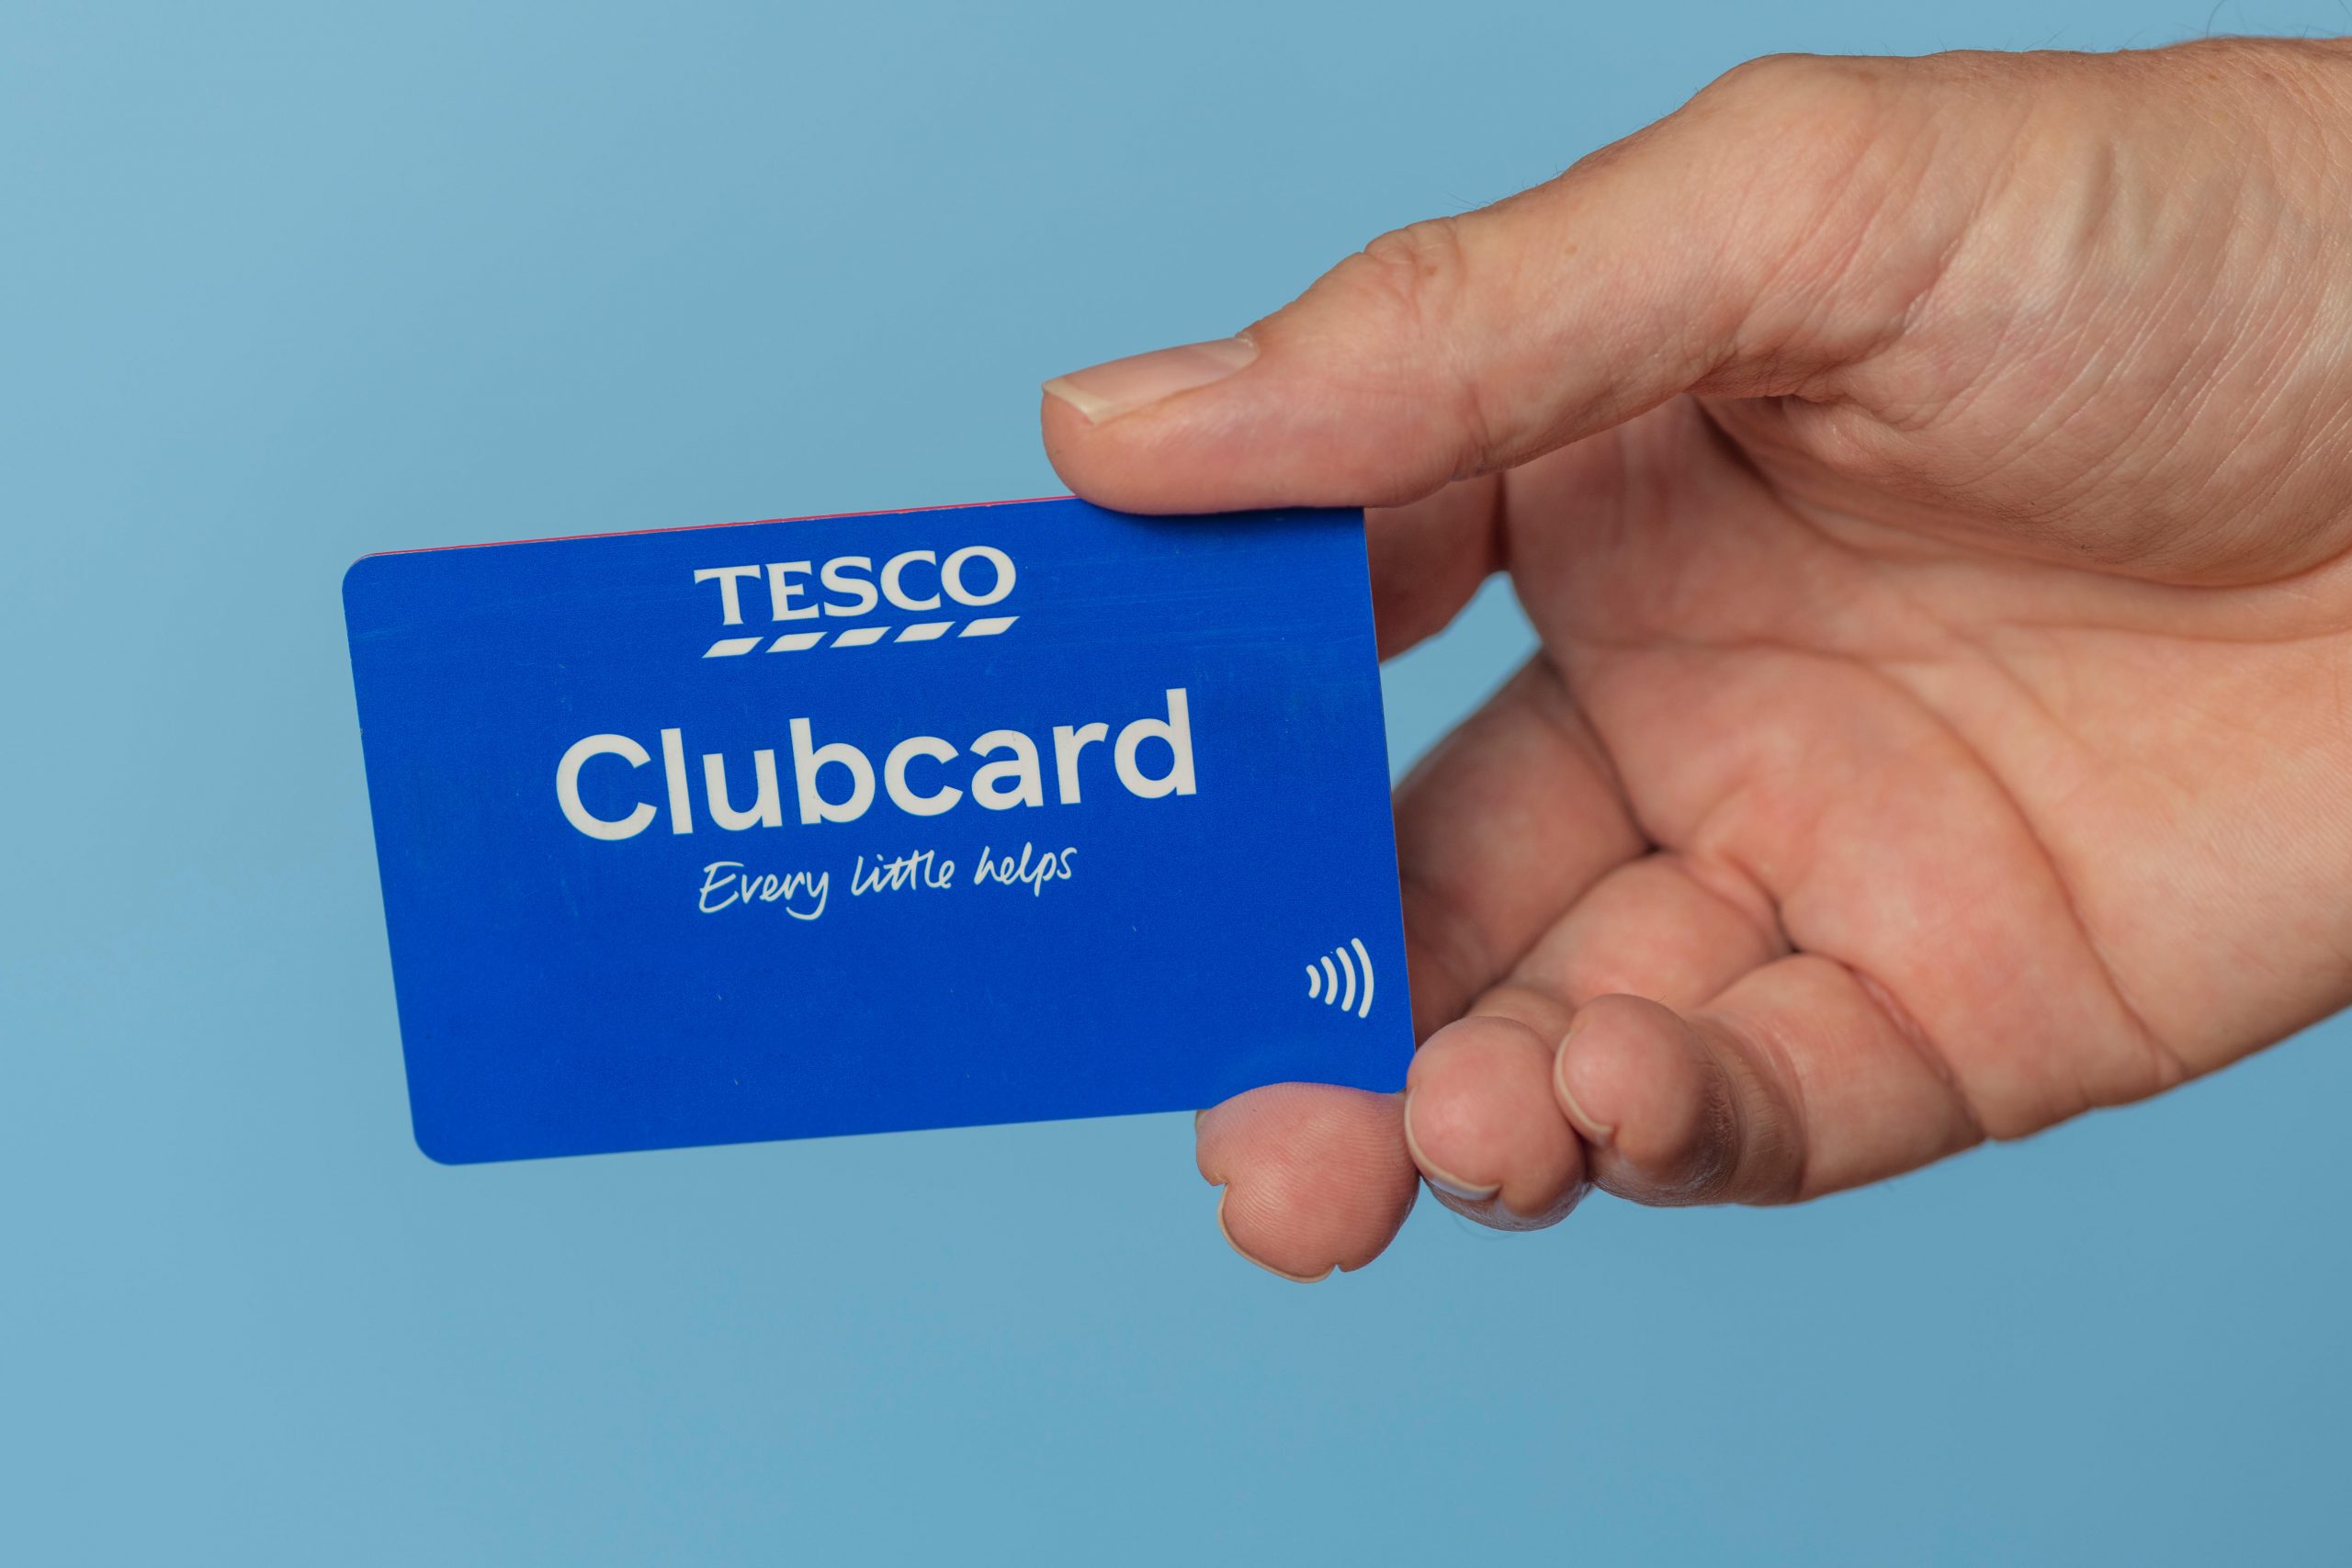 Millions of Tesco shoppers can earn EXTRA Clubcard points worth up to £100 within days